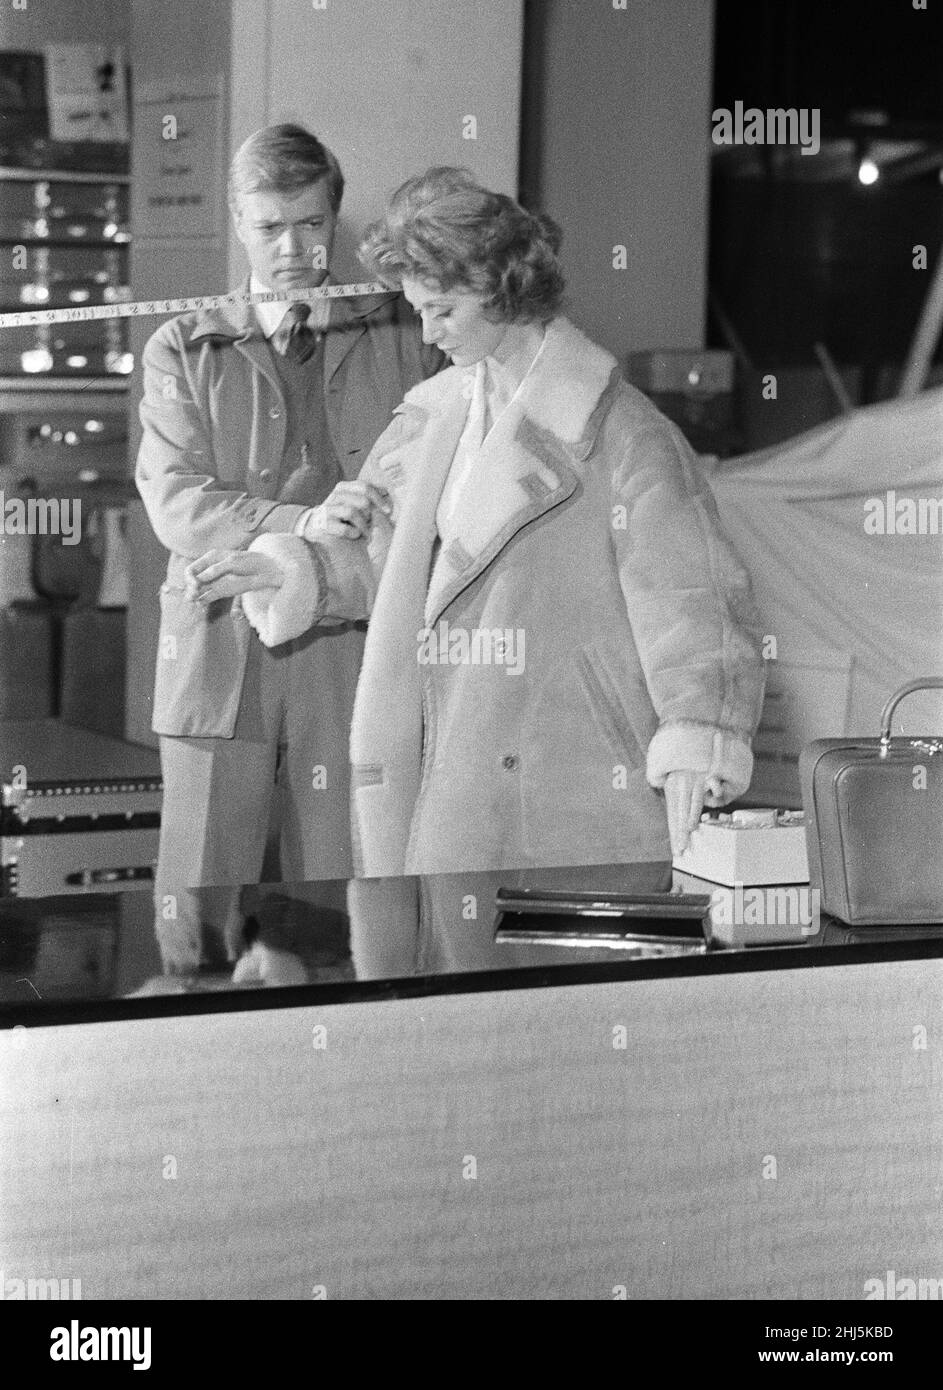 1960 Film Peeping Tom, behind the scenes filming at Pinewood Studios, Buckinghamshire, Monday 30th November 1959. Peeping Tom, a psychological horror thriller film directed by Michael Powell. At the time, the film harsh reception by critics, but has since been re-evaluated and is now widely considered a masterpiece of  British cinema.   Our Picture Shows ... Moira Shearer who plays the character Vivian. Stock Photo